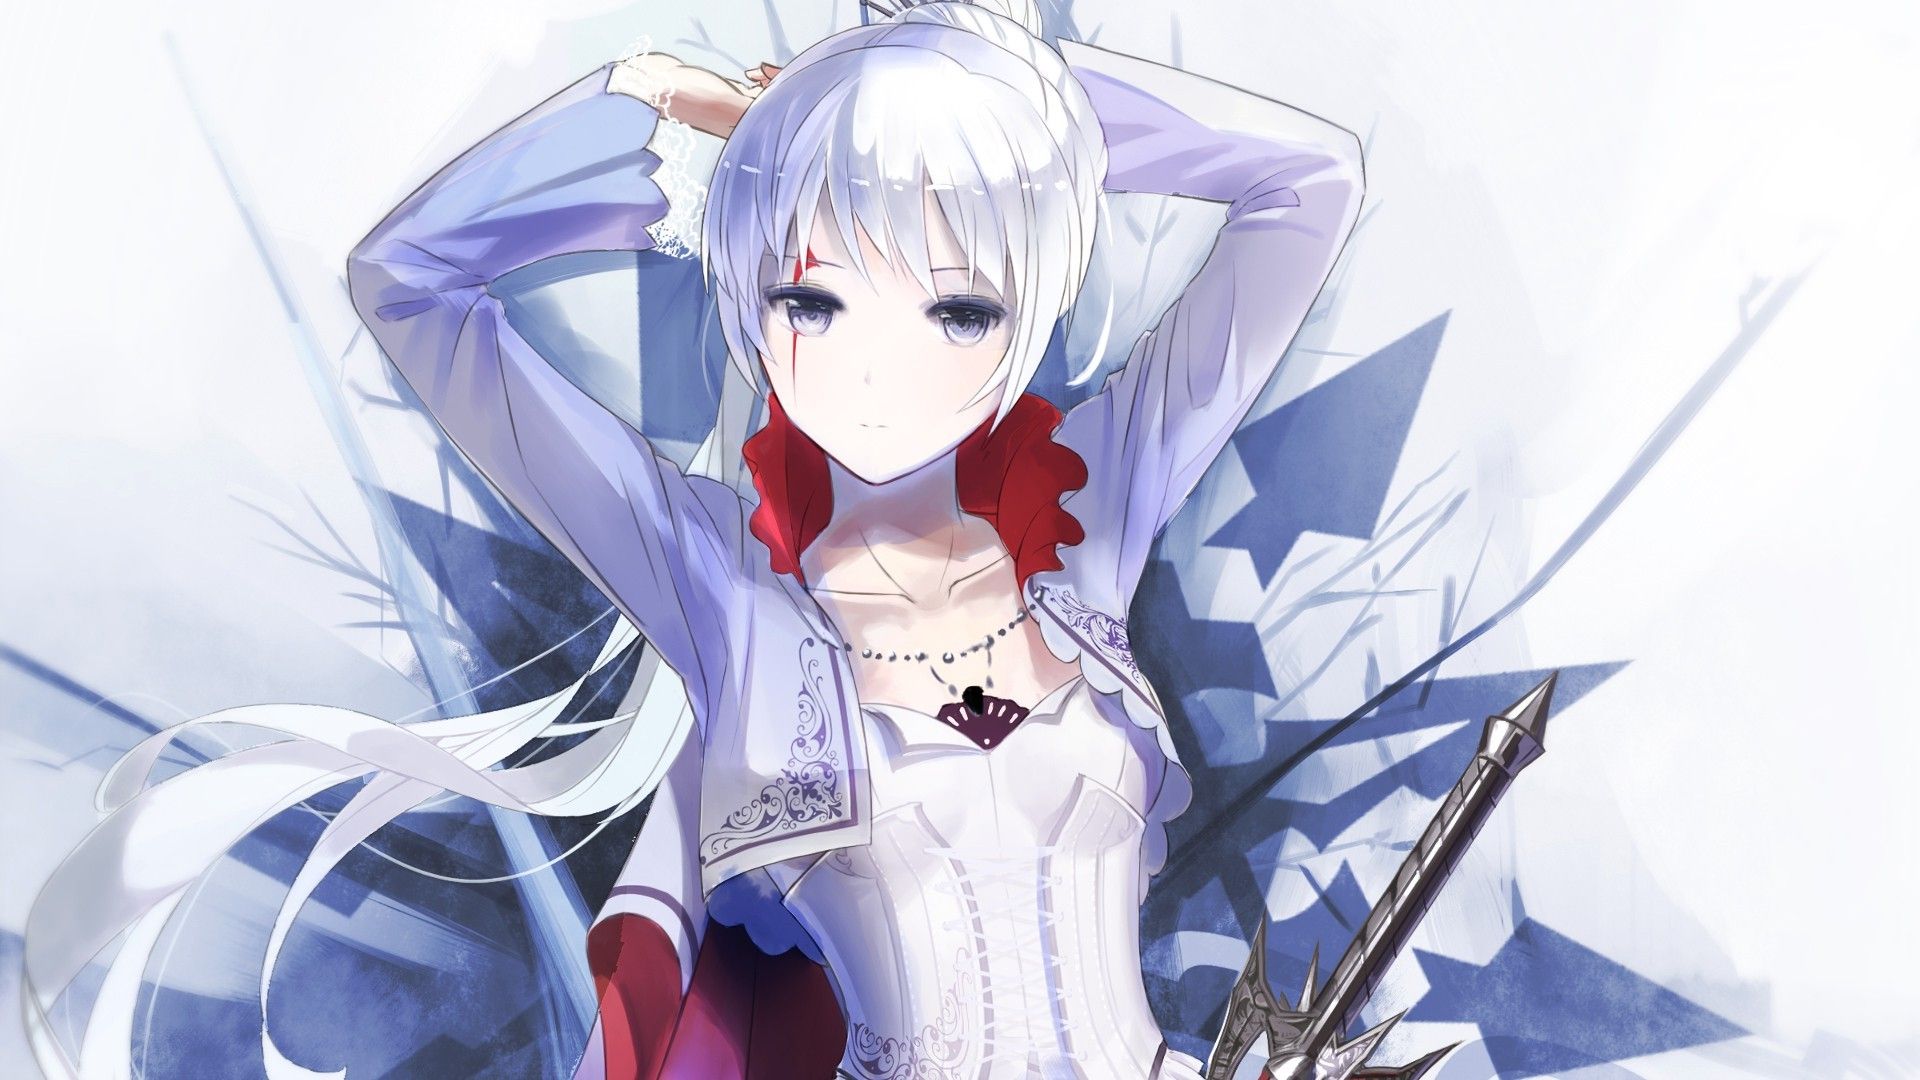 anime, Anime Girls, RWBY, Weiss Schnee Wallpaper HD / Desktop and Mobile Background